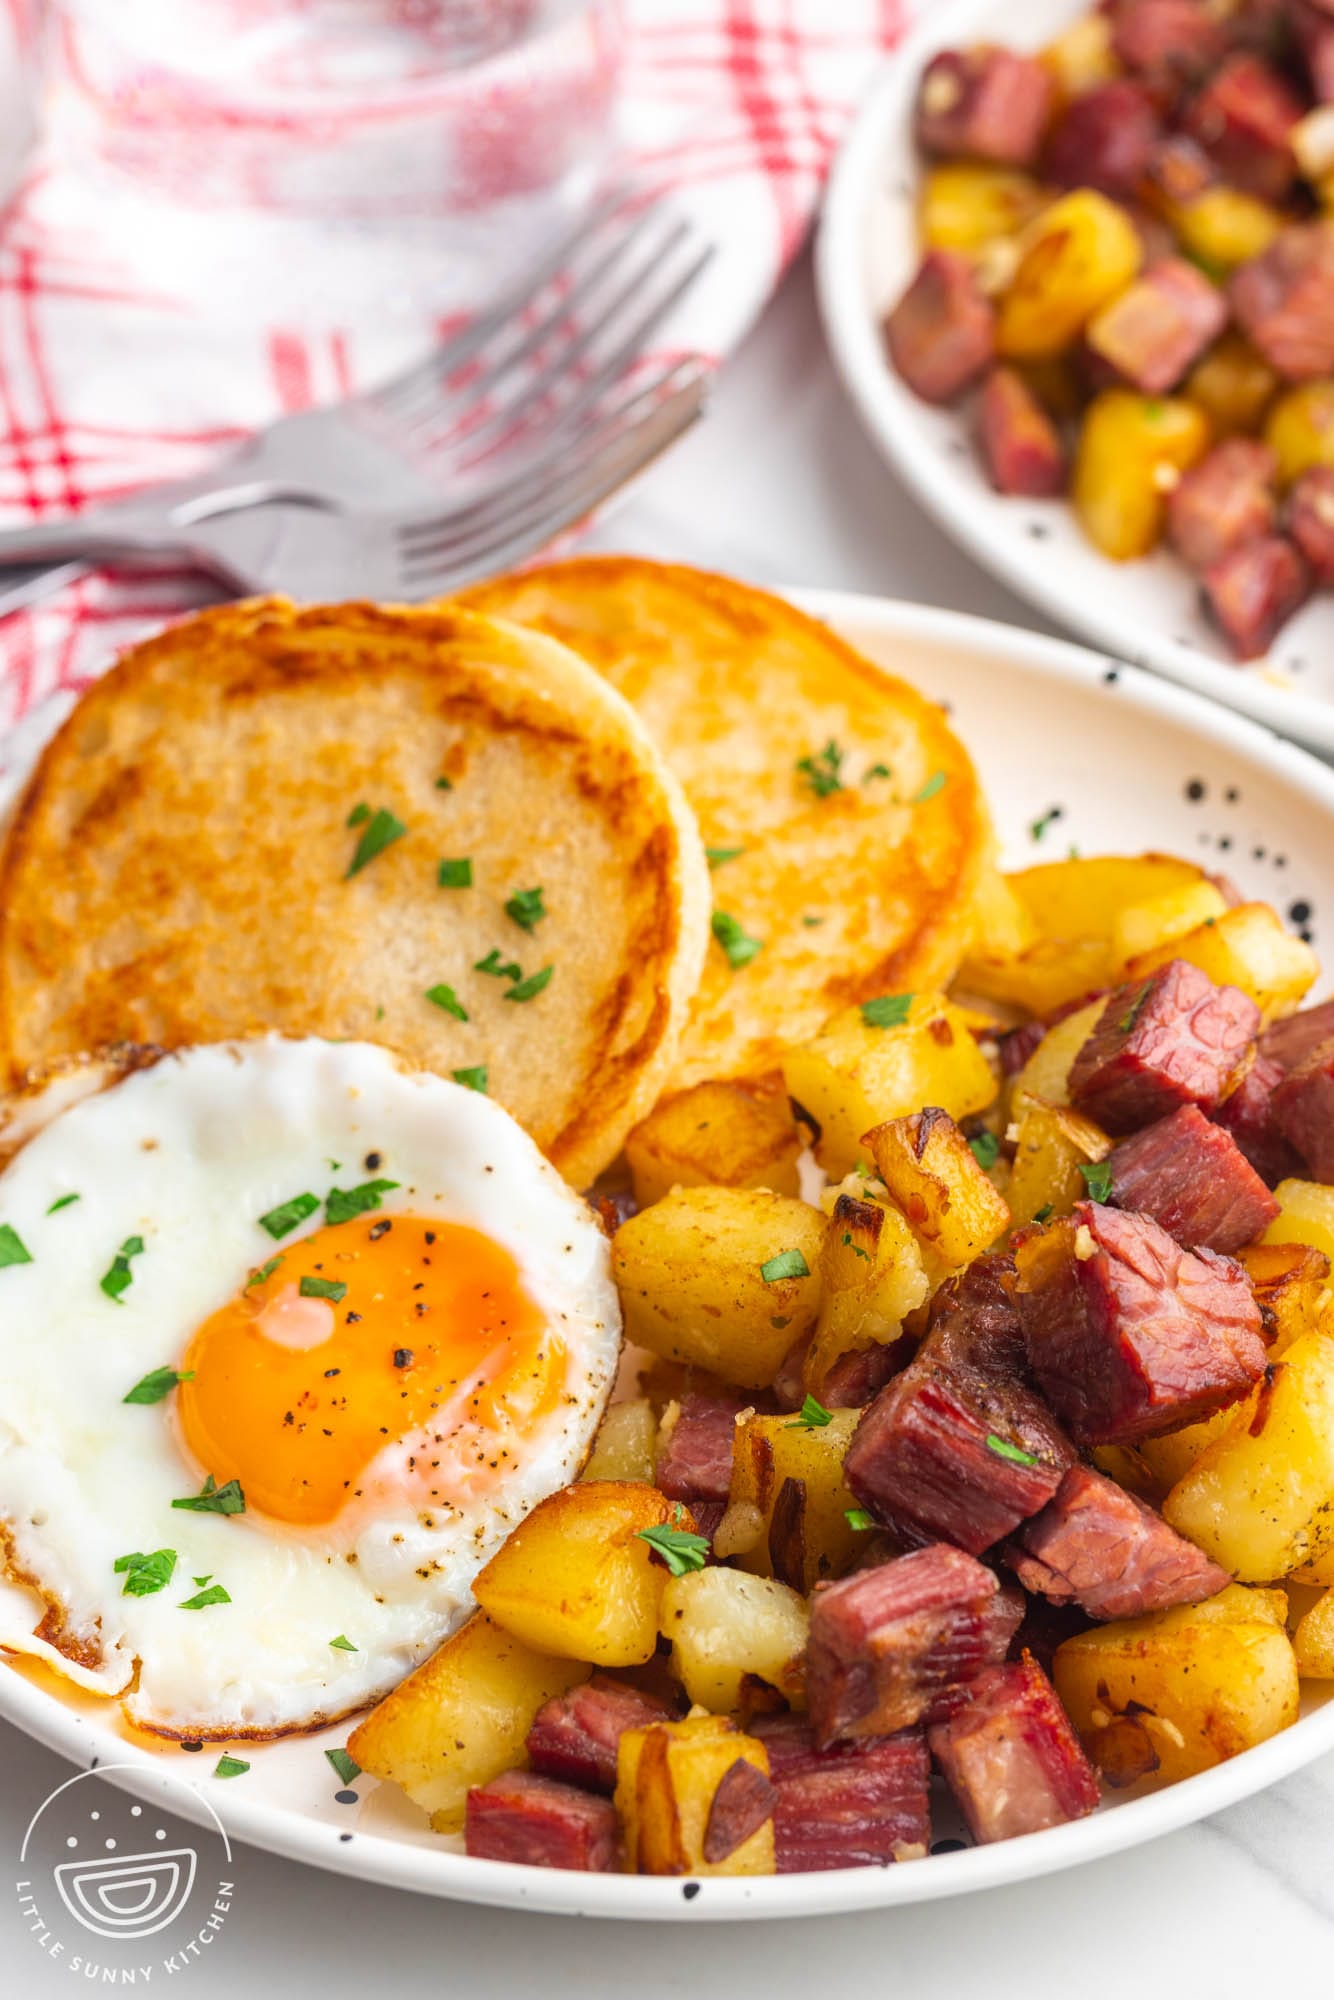 A plate of corned beef hash with toasted biscuits and fried eggs.